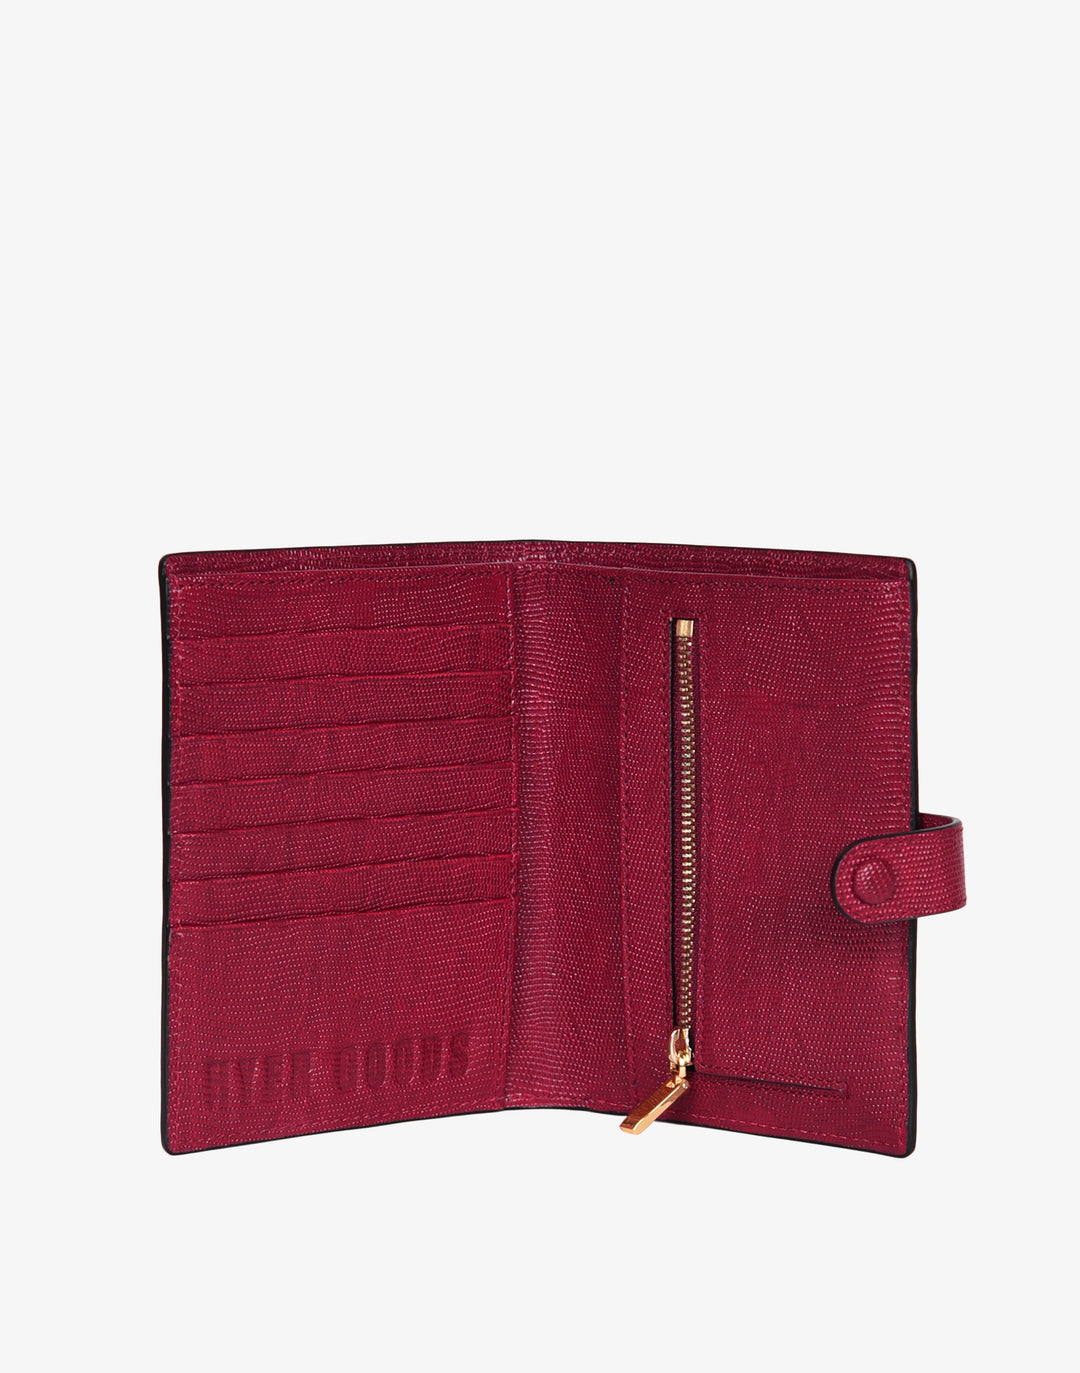 hyer goods recycled leather travel passport wallet with zipper pocket embossed cherry red lizard #color_cherry-red-lizard